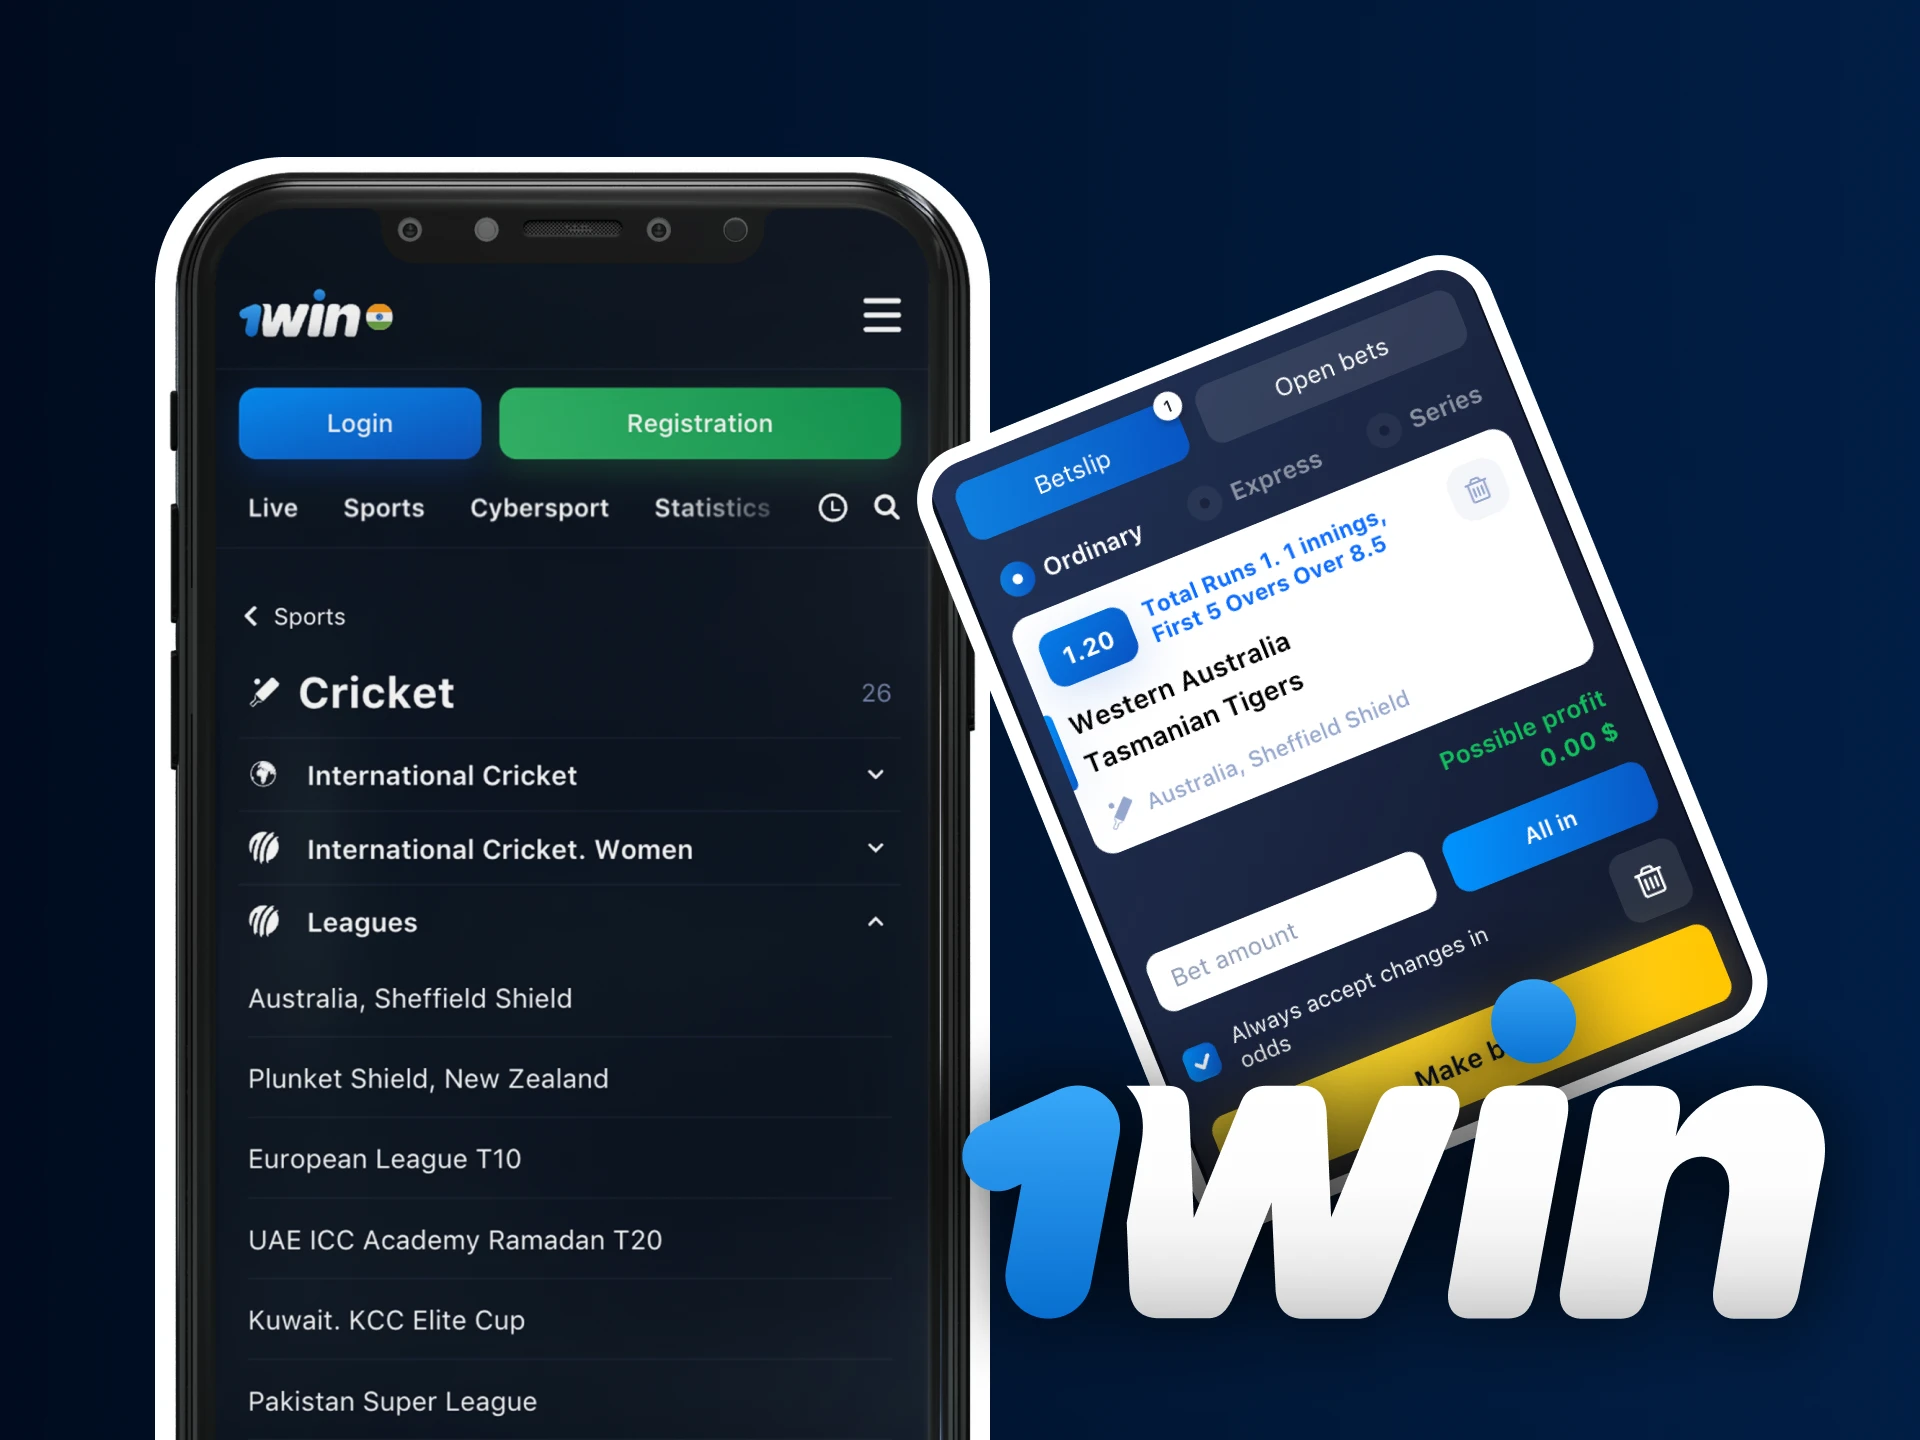 How can I bet on IPL matches at 1win online casino on my phone.